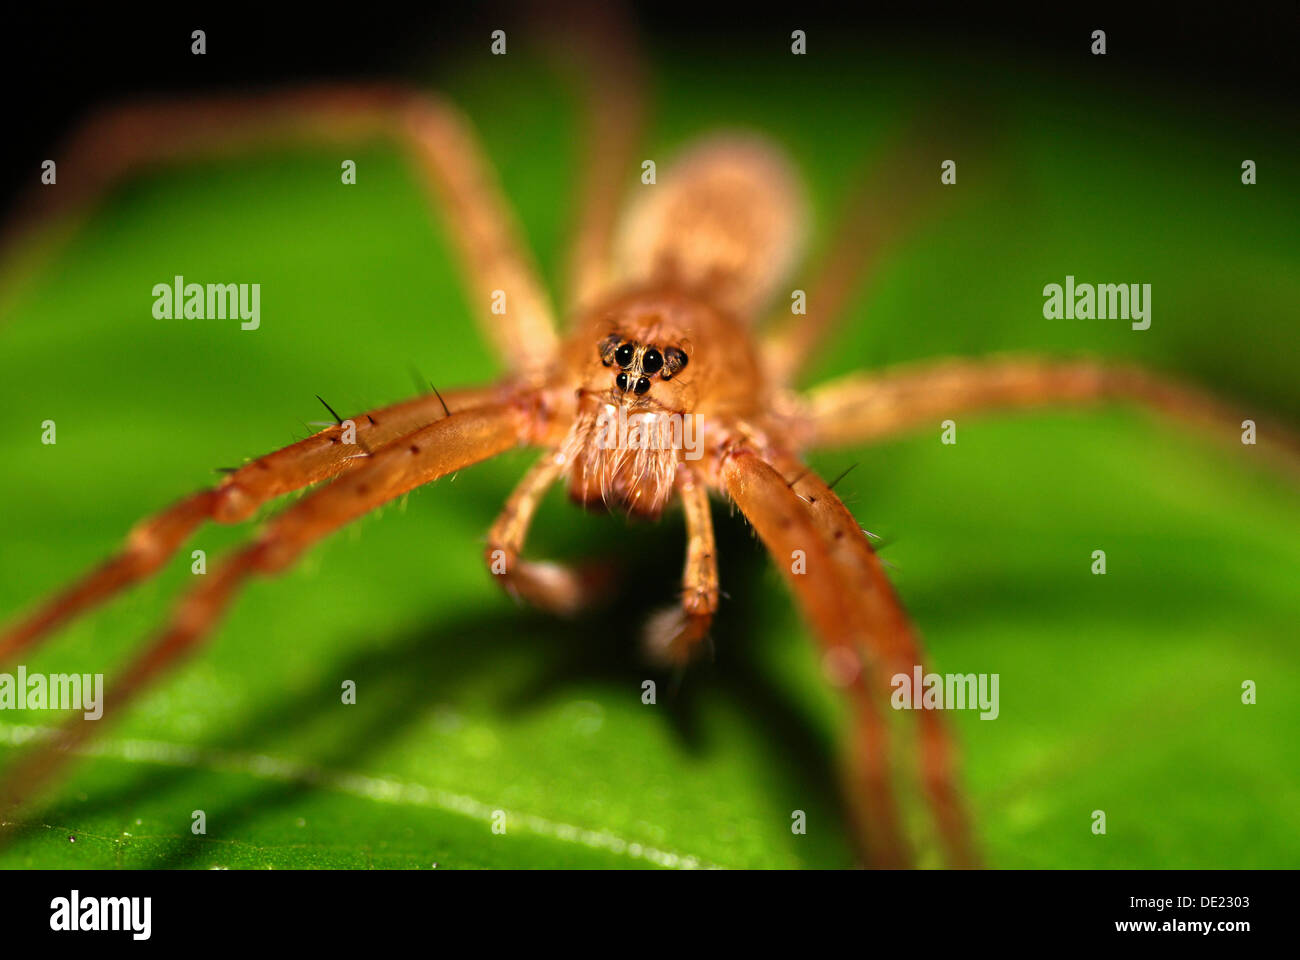 Spider on leaf, frontal view Stock Photo